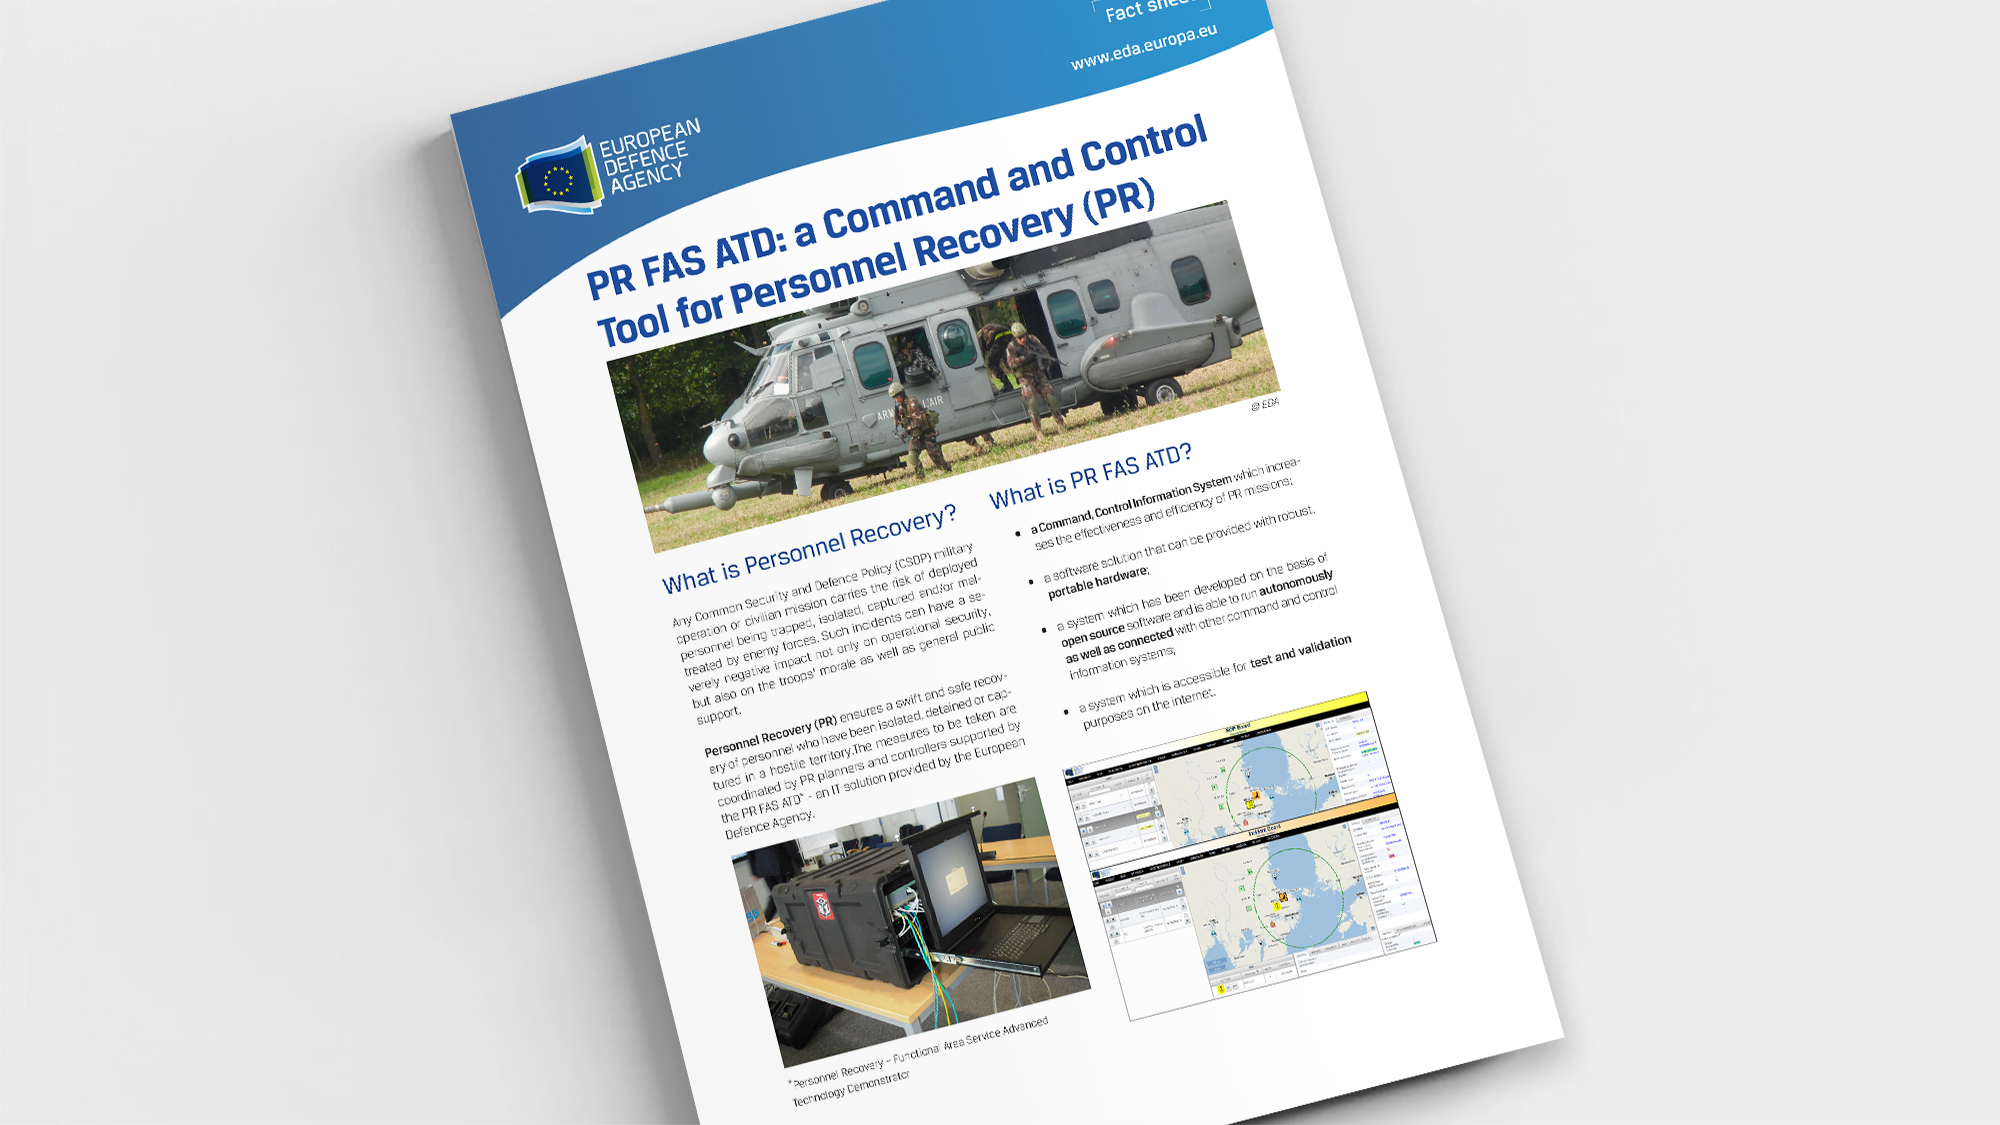 Factsheet PR FAS ATD - a Command and Control Tool for Personnel Recovery